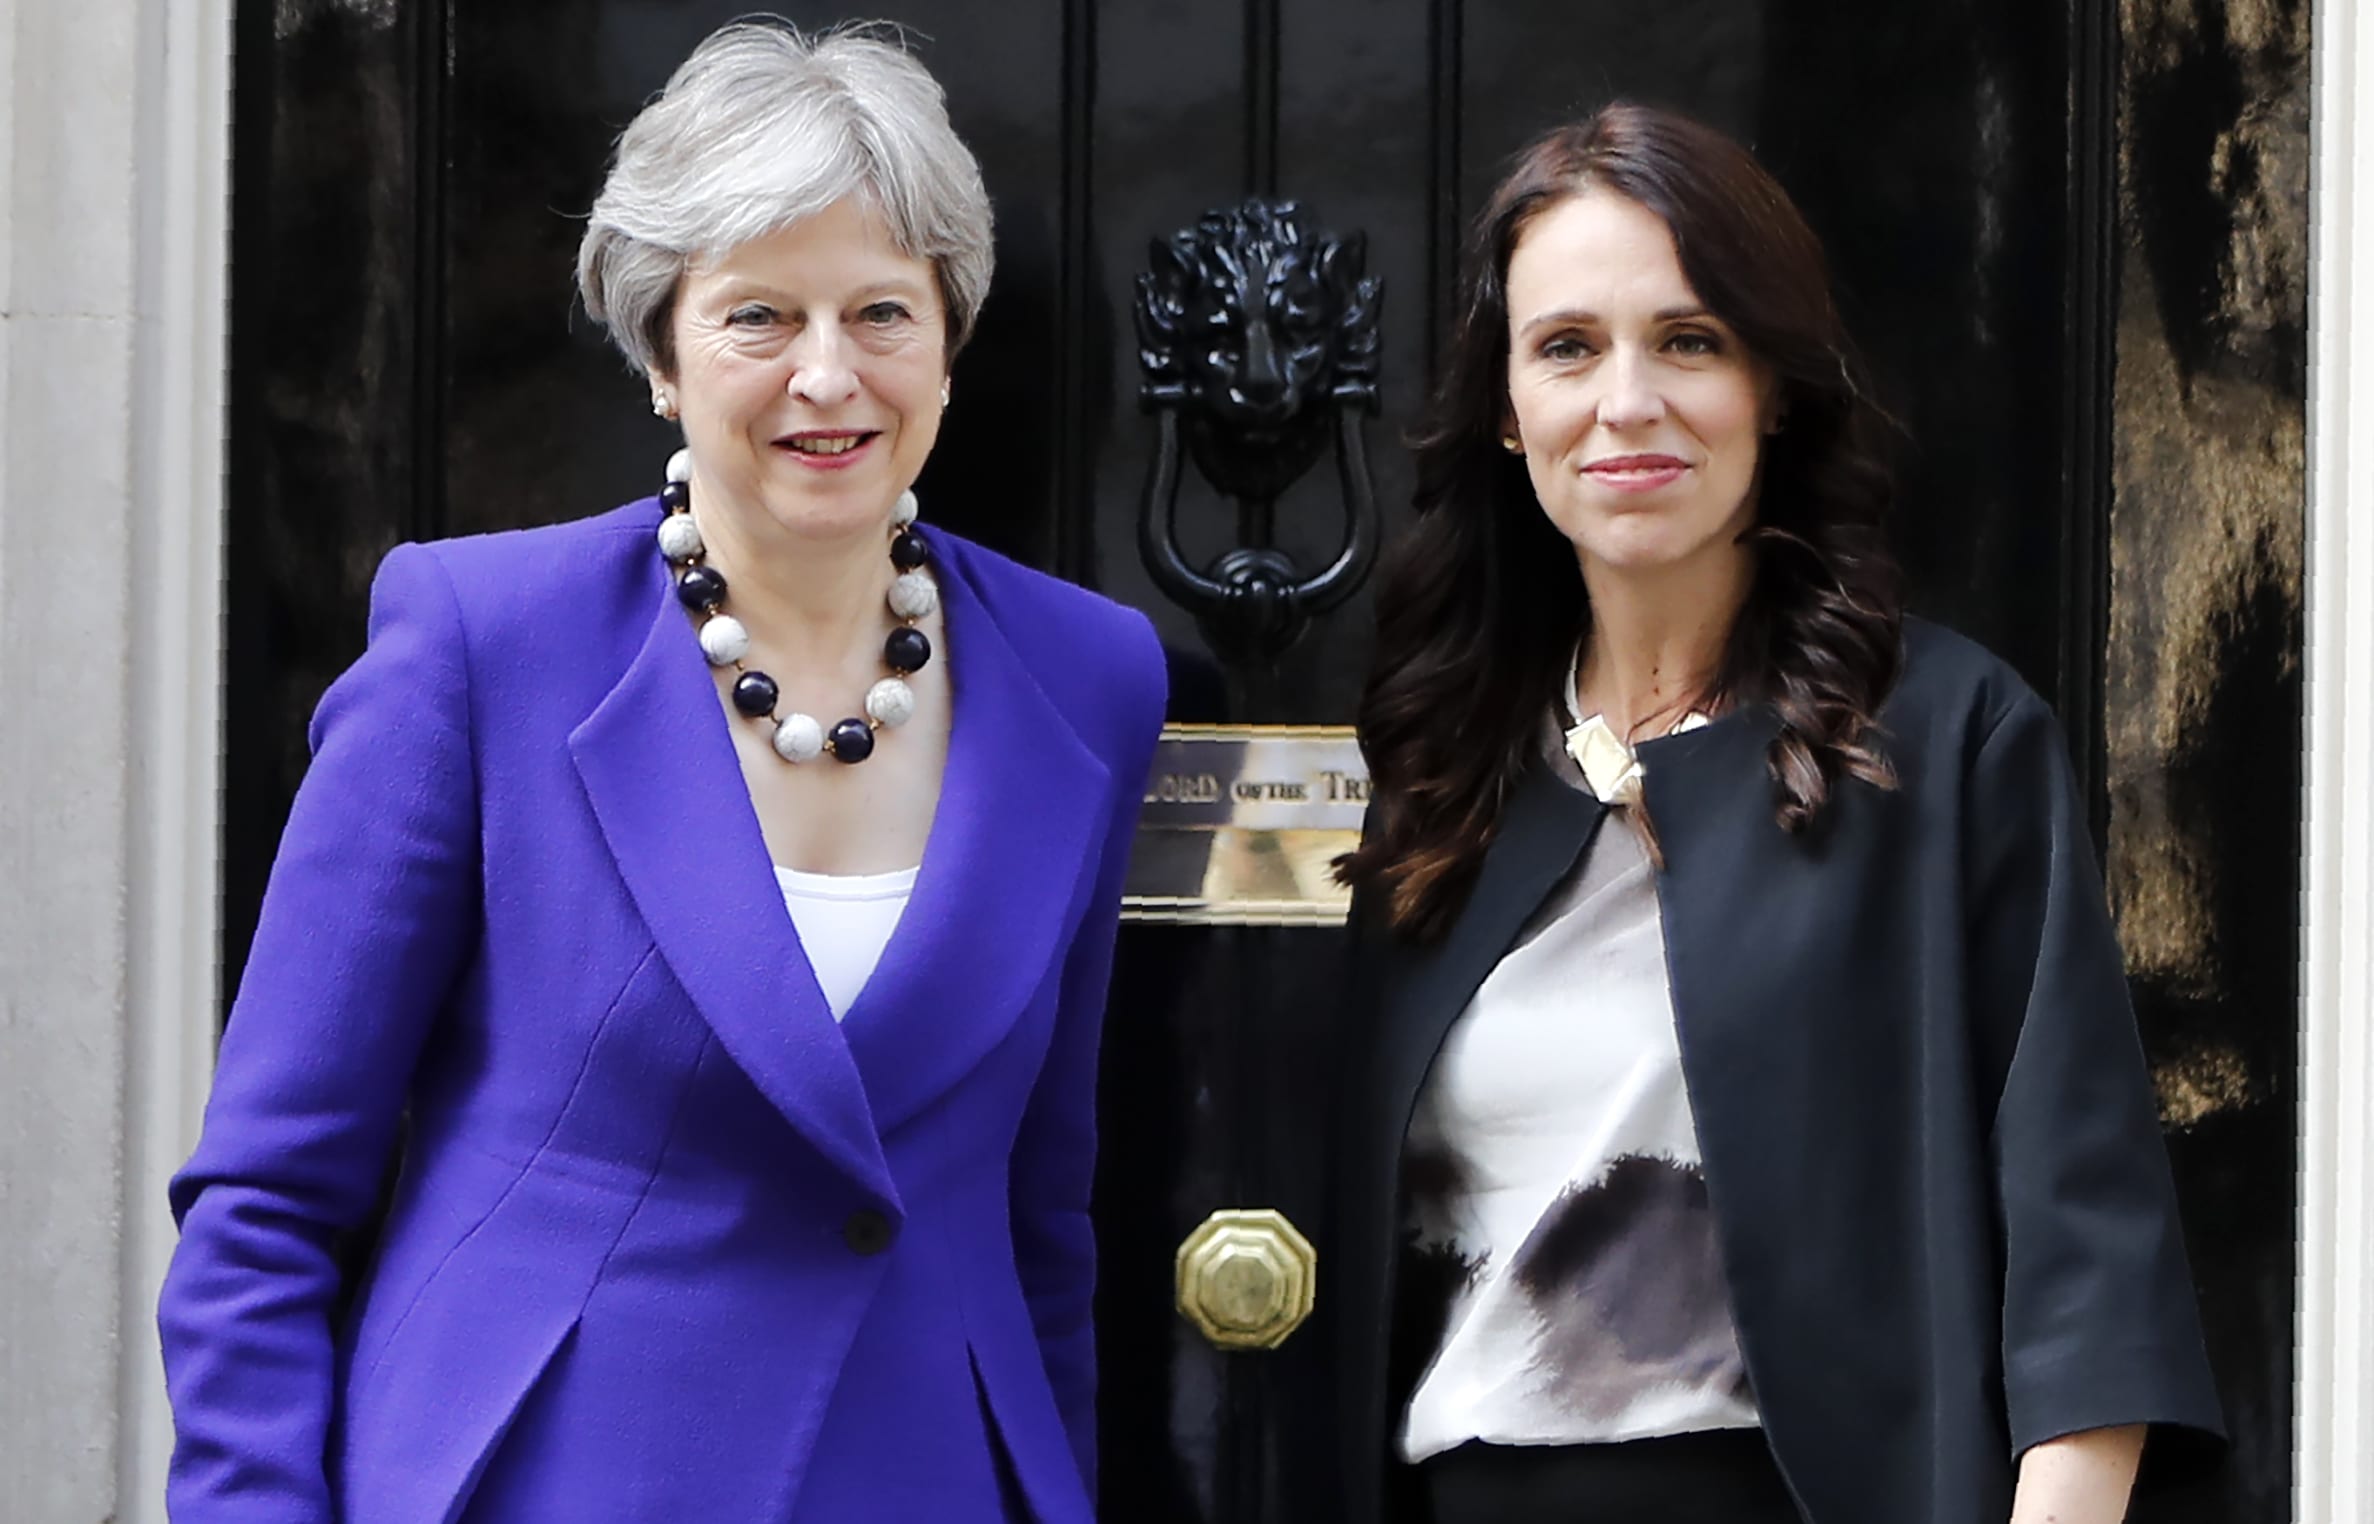 British Prime Minister Theresa May with New Zealand's Prime Minister Jacinda Ardern.